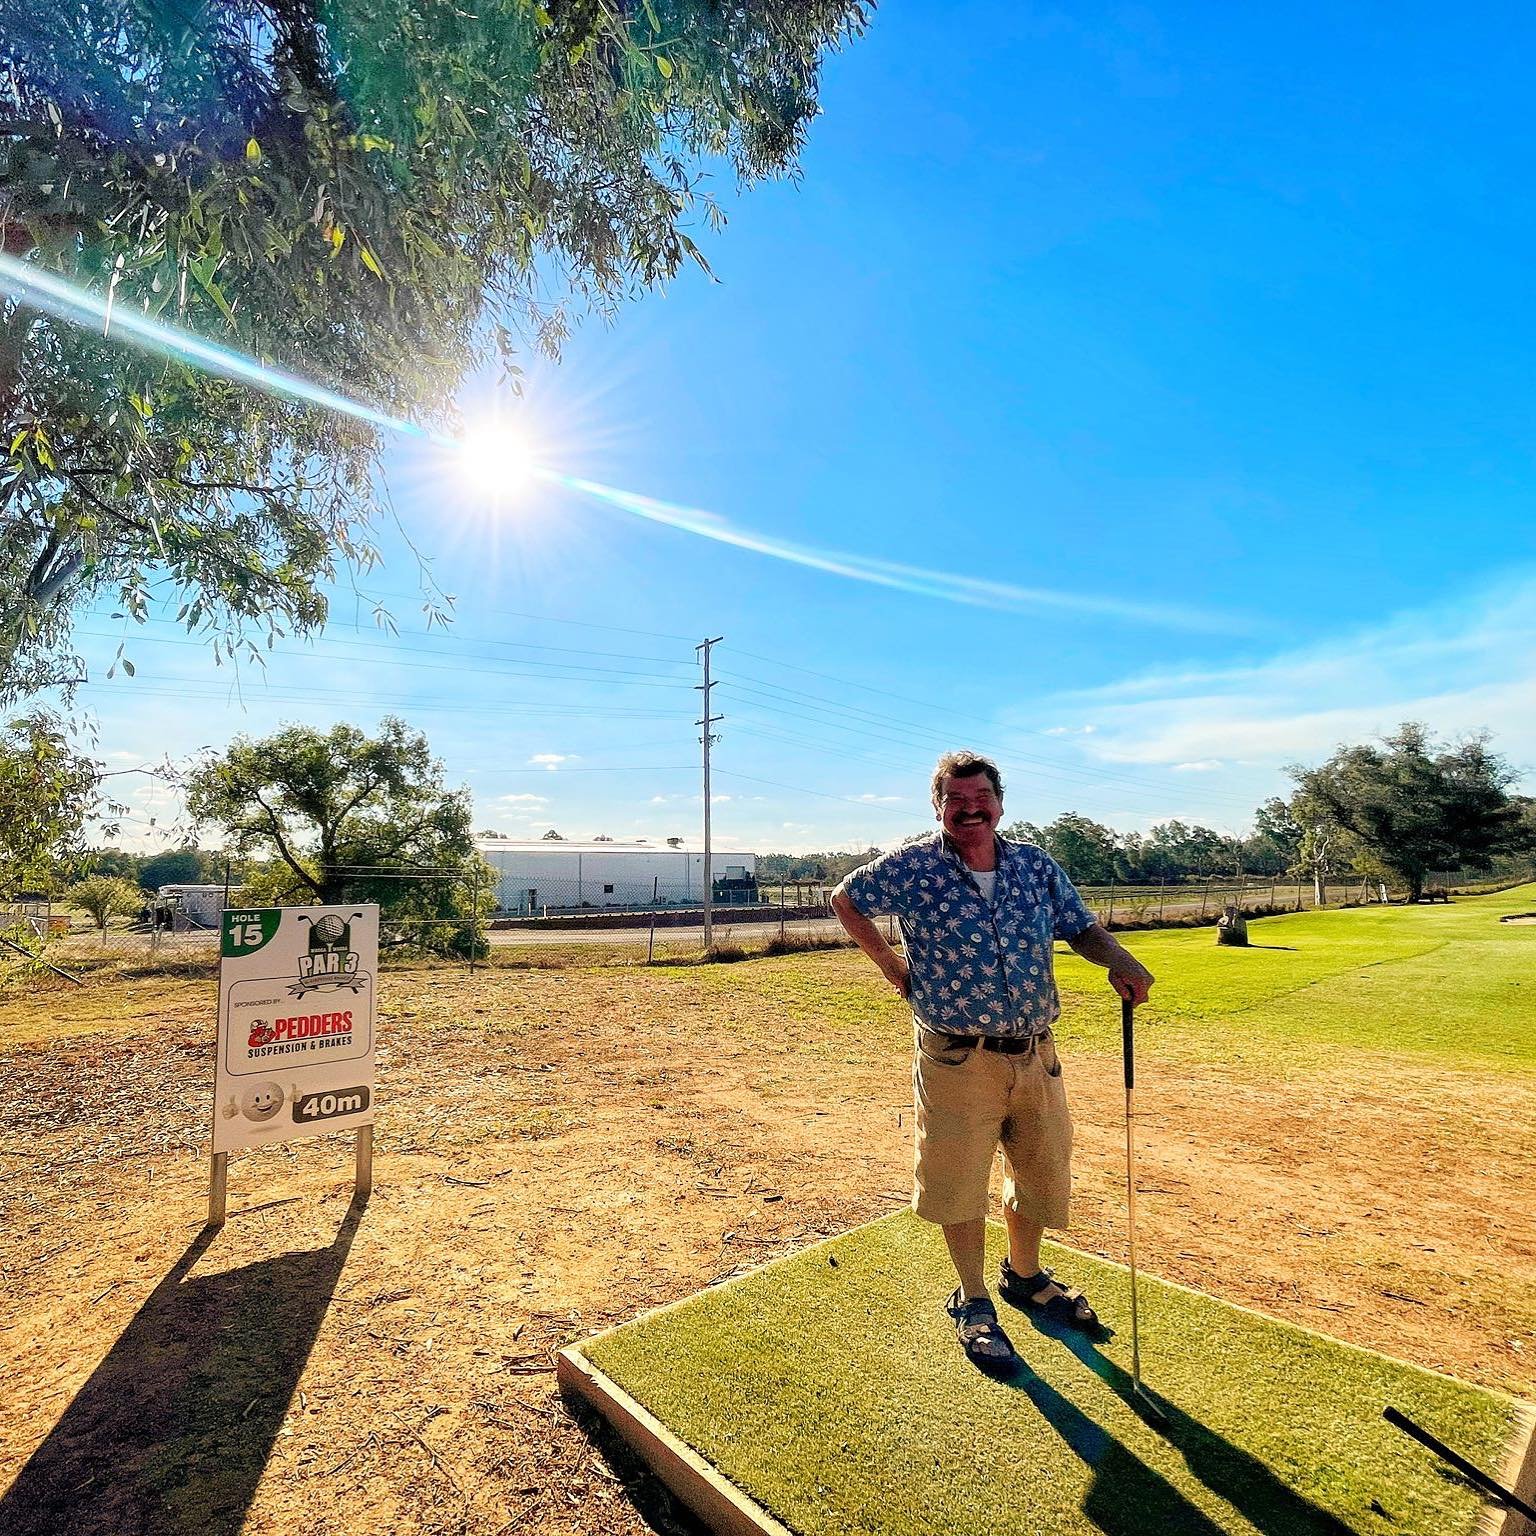 Tee-rific day on the course! ⛳️🏌🏽☀️

#ndis #ndisprovider #ndissupport #disabilitysupport #inclusion #equality #diversity #disabilityawareness 
#WaggaWagga